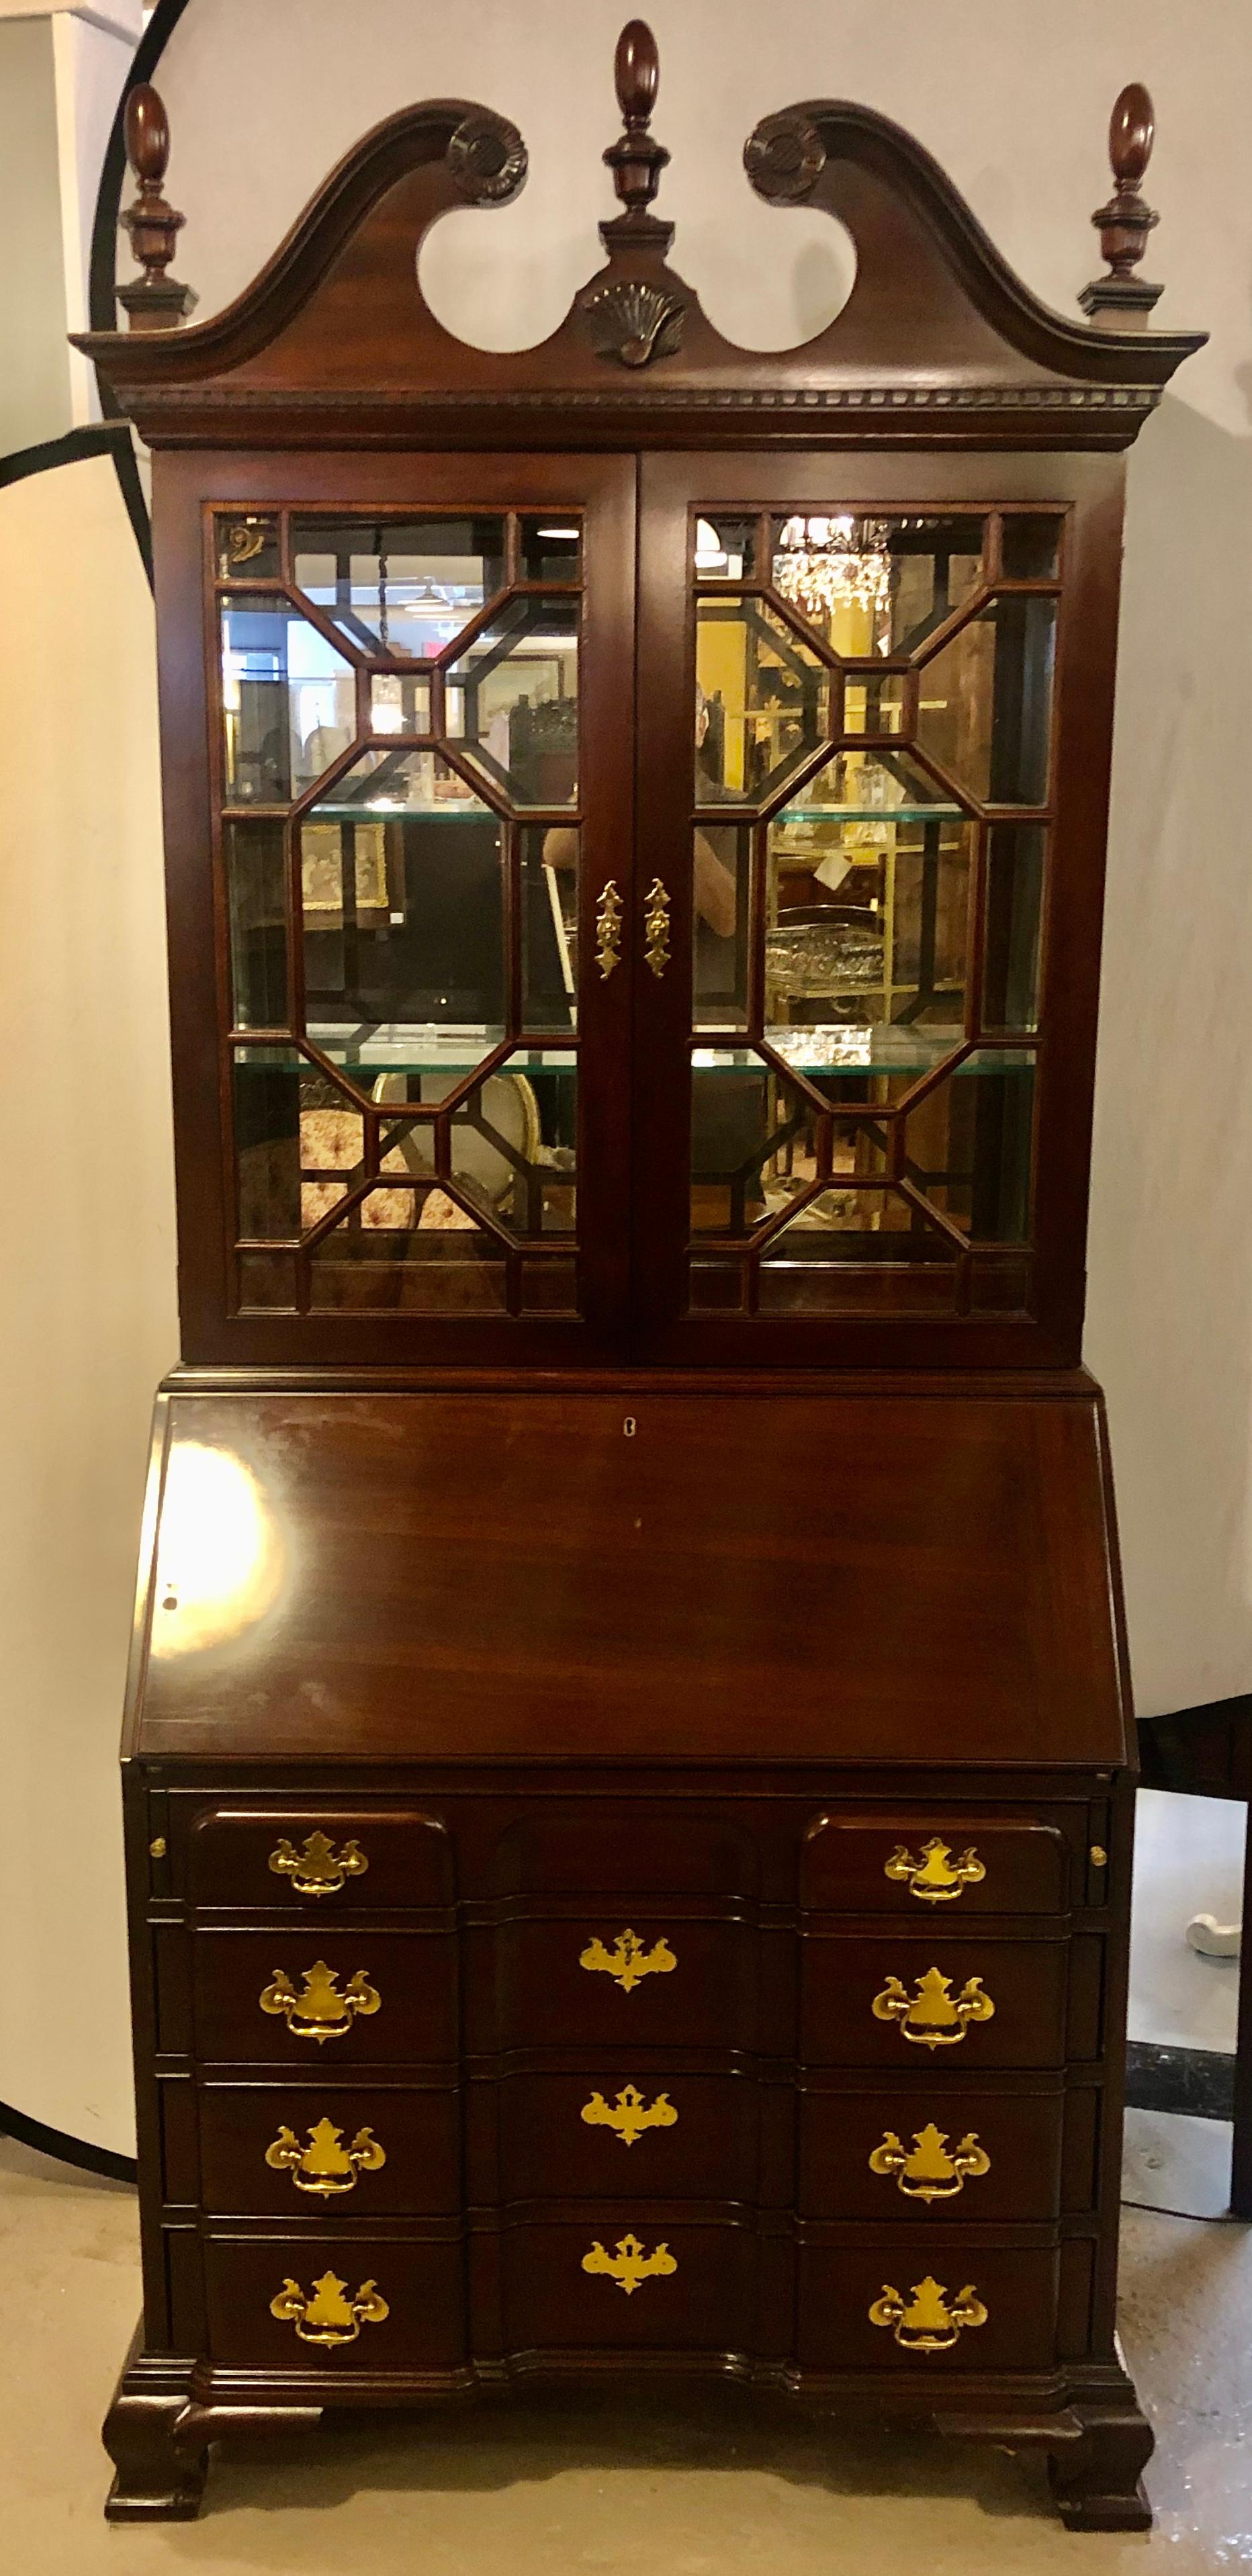 Pennsylvania House secretary desk / bookcase. This fine mahogany block front two-piece Chippendale style secretary bookcase cabinet has a lighted all mirrored with polished edges interior. The drop down slant front having a writing surface with